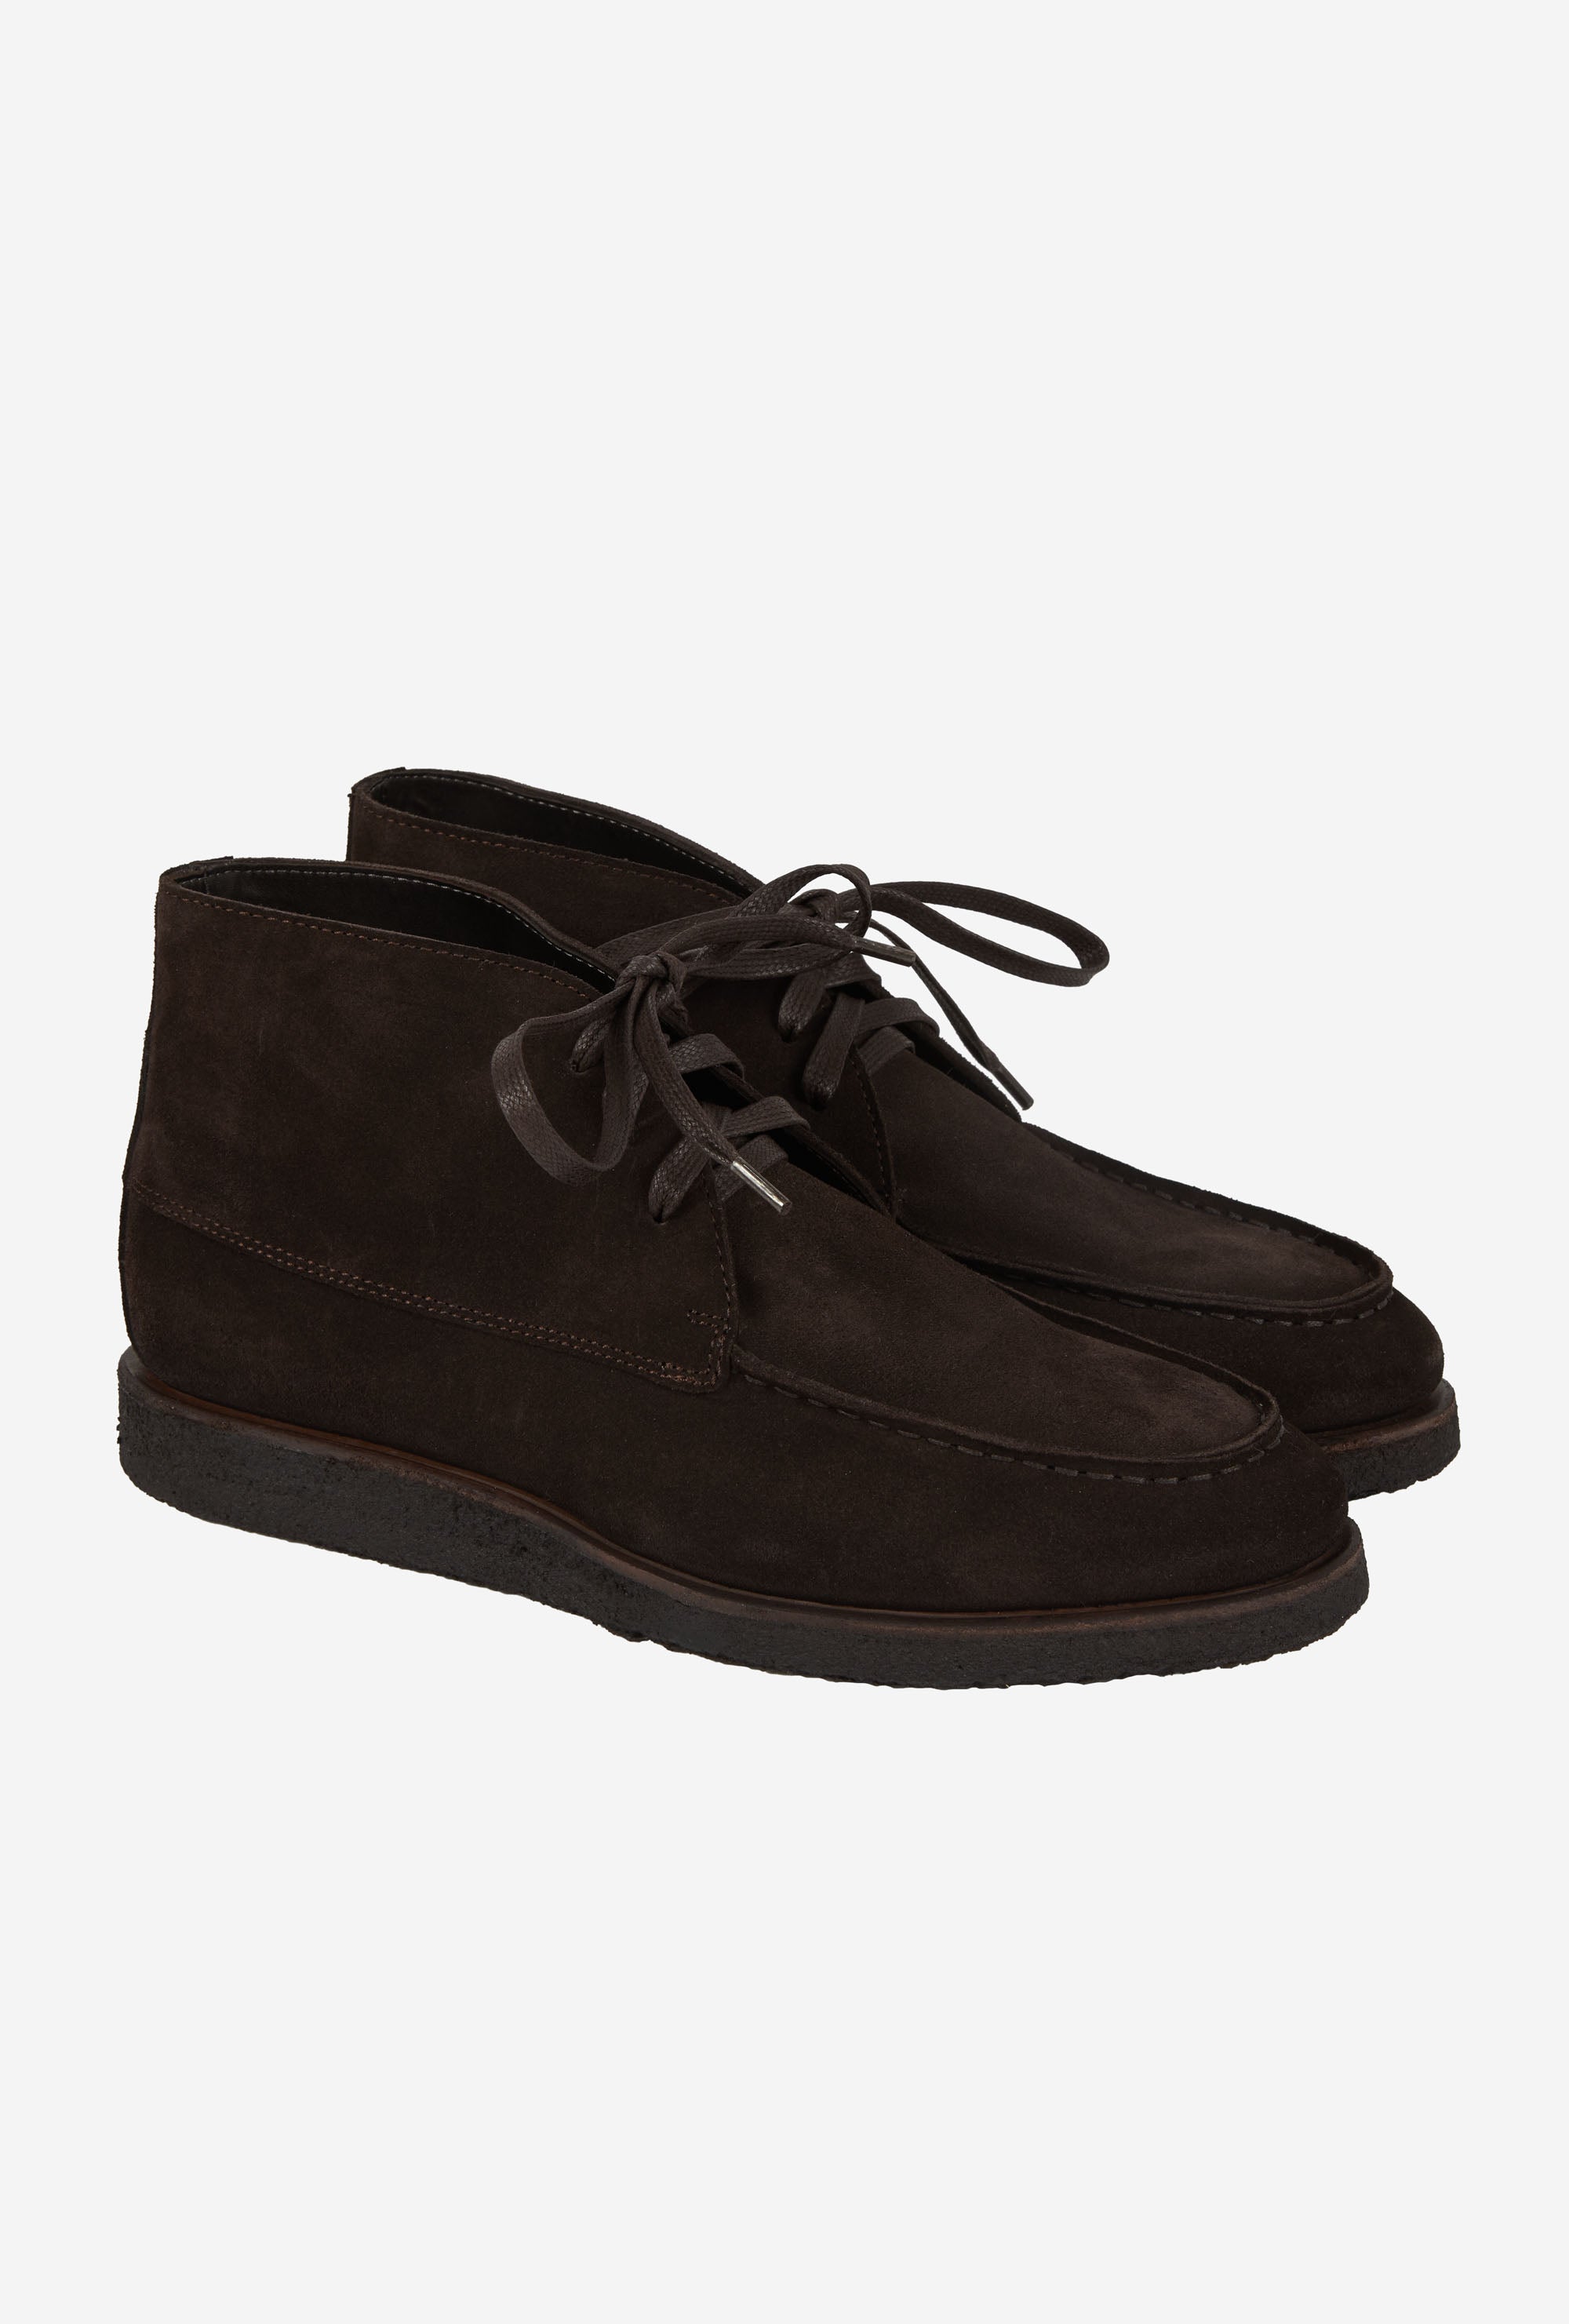 Boat Shoes Brown Suede